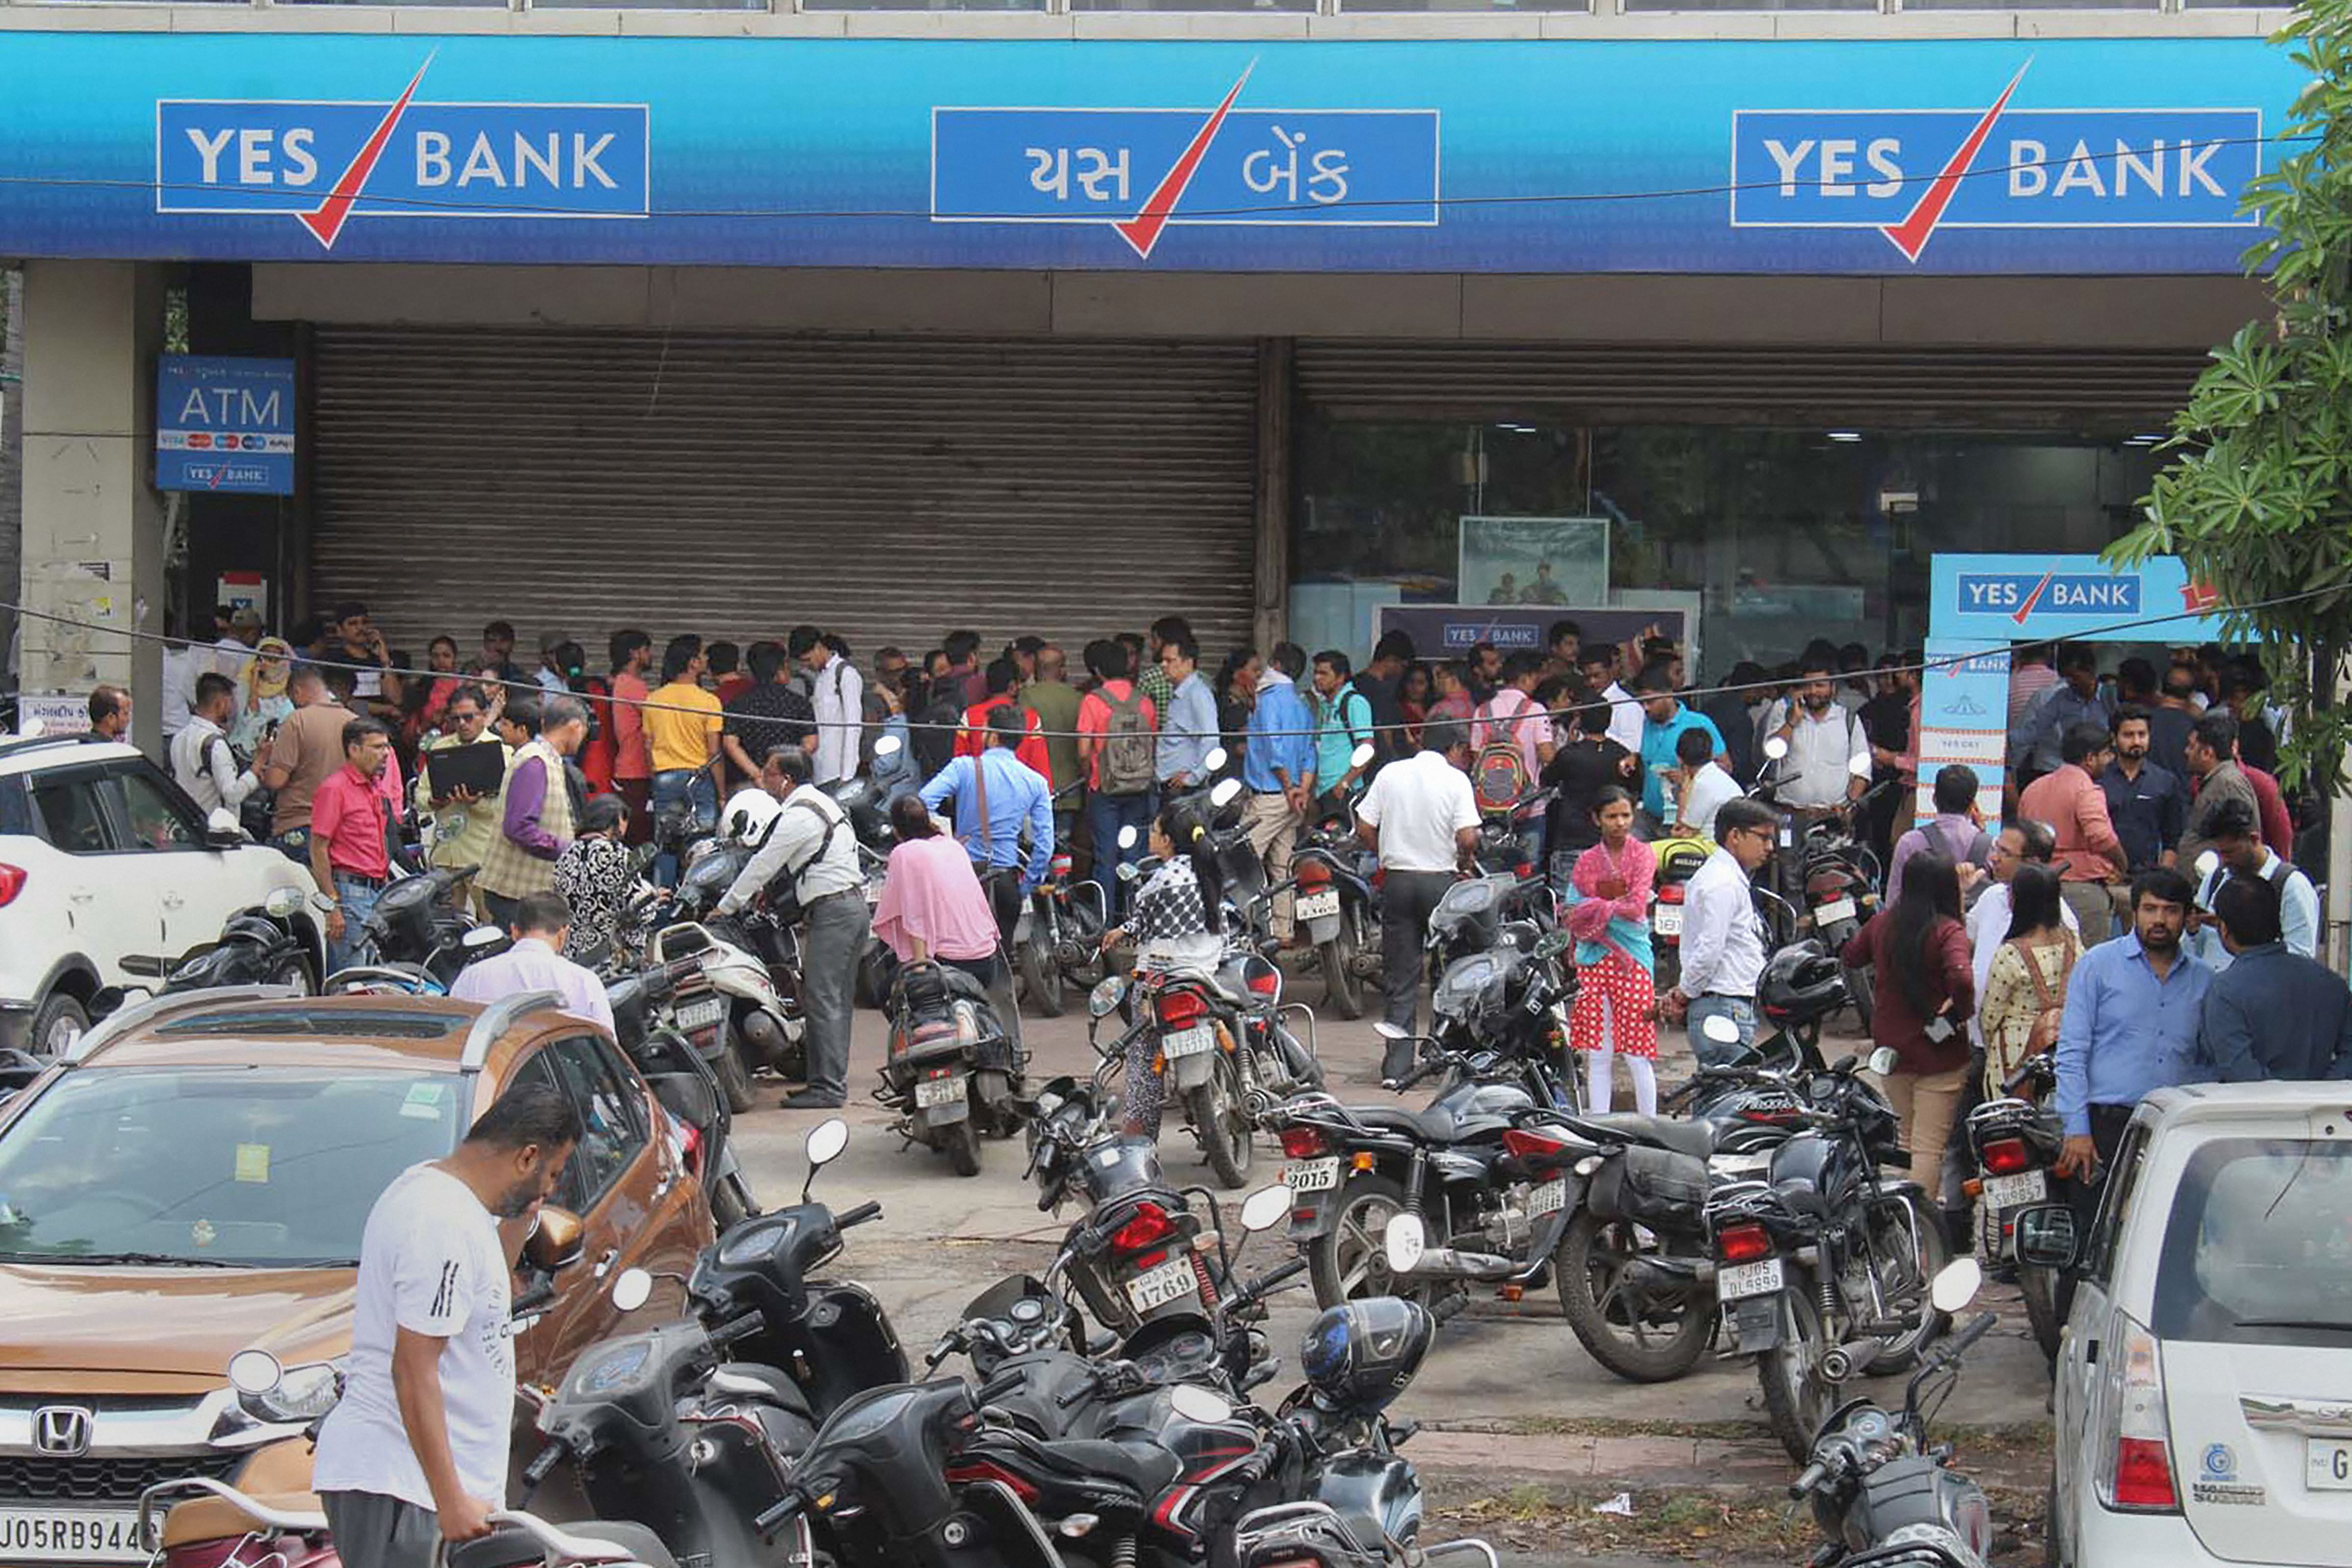  Account holders gather outside Yes Bank to withdraw money, in Surat. (PTI Photo)